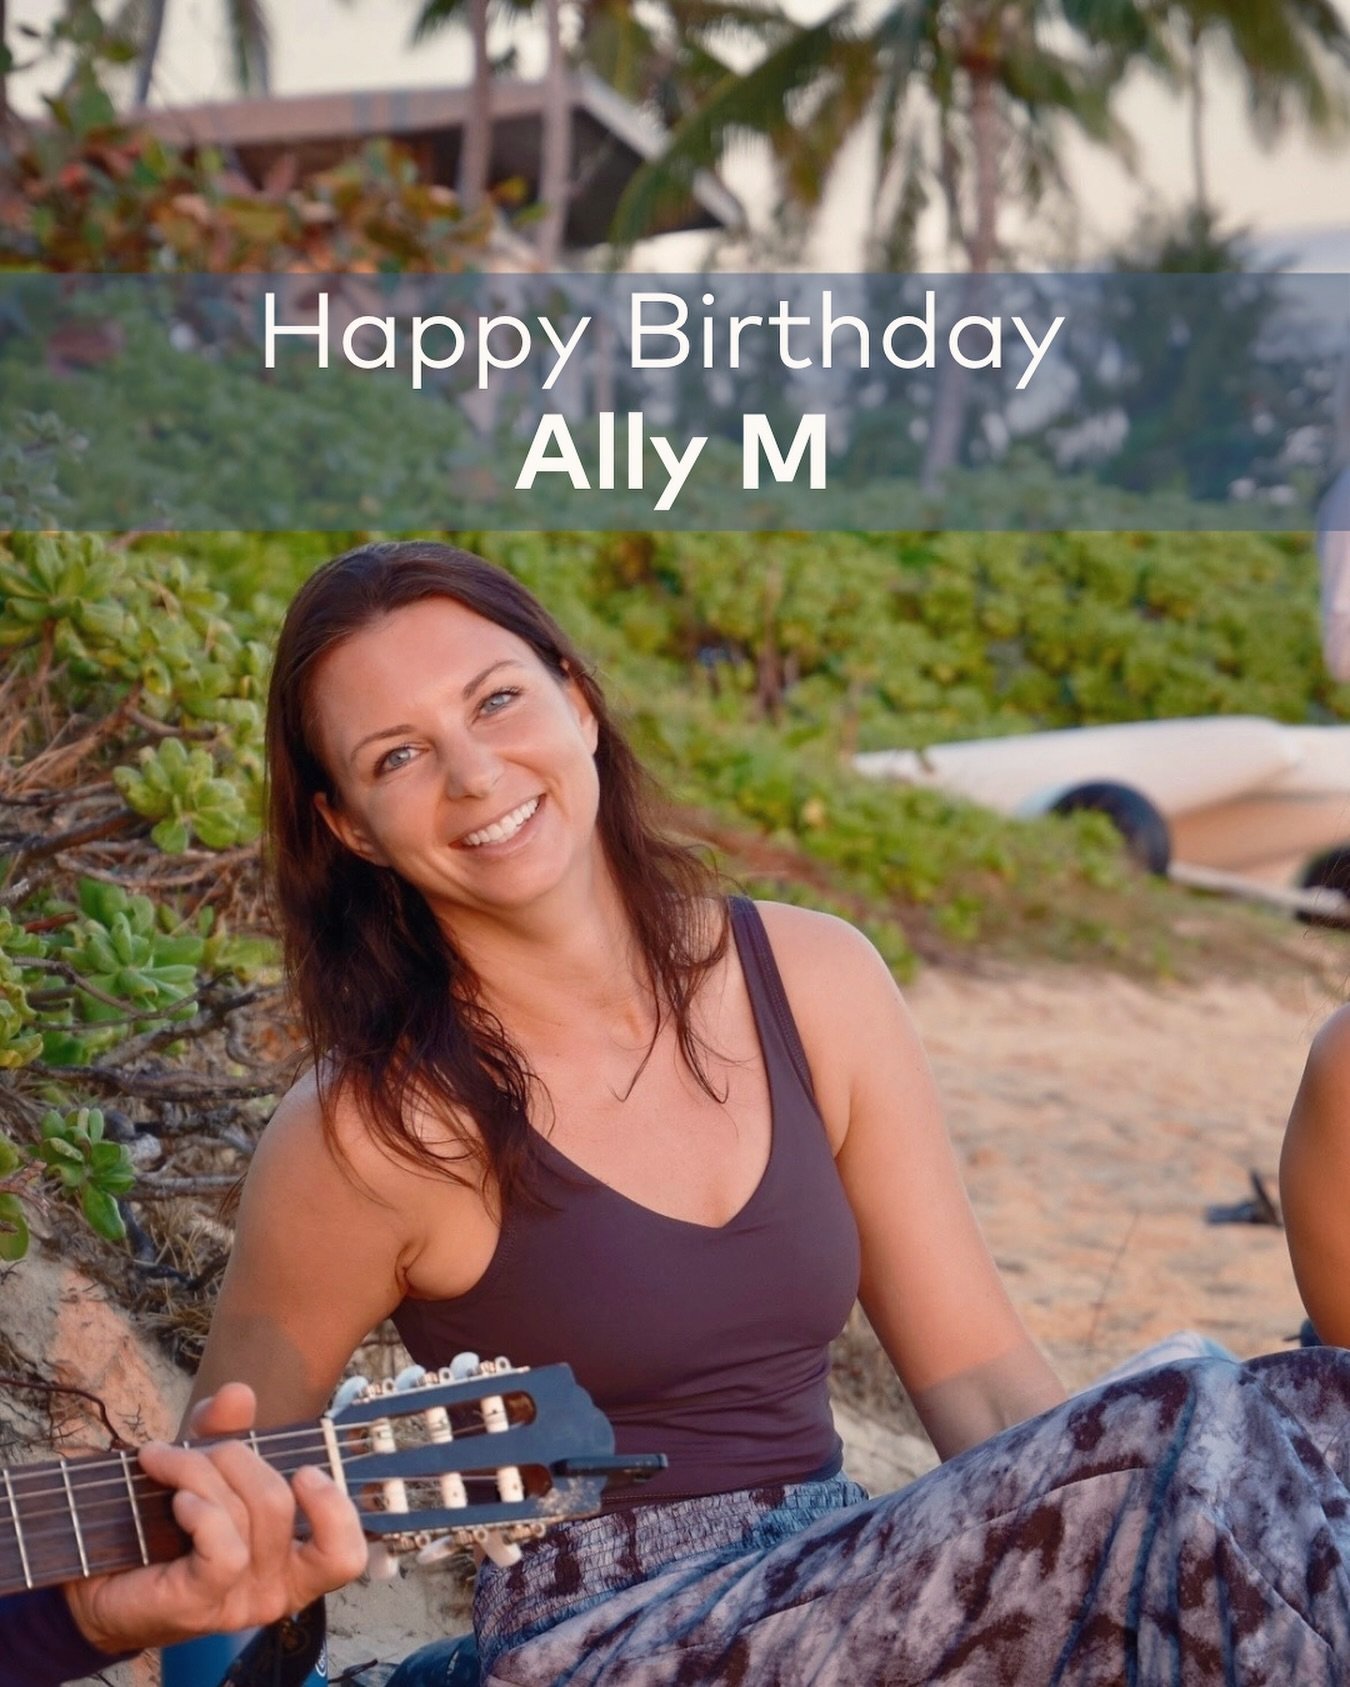 Happy birthday @amilford13 !!!
Ally is so sweet and caring. She is a great listener a hard worker, and keeps a perennial student mindset. 

Three fun facts about Ally M:
1. She teaches the first grade, and has a doctorate of education in educational 